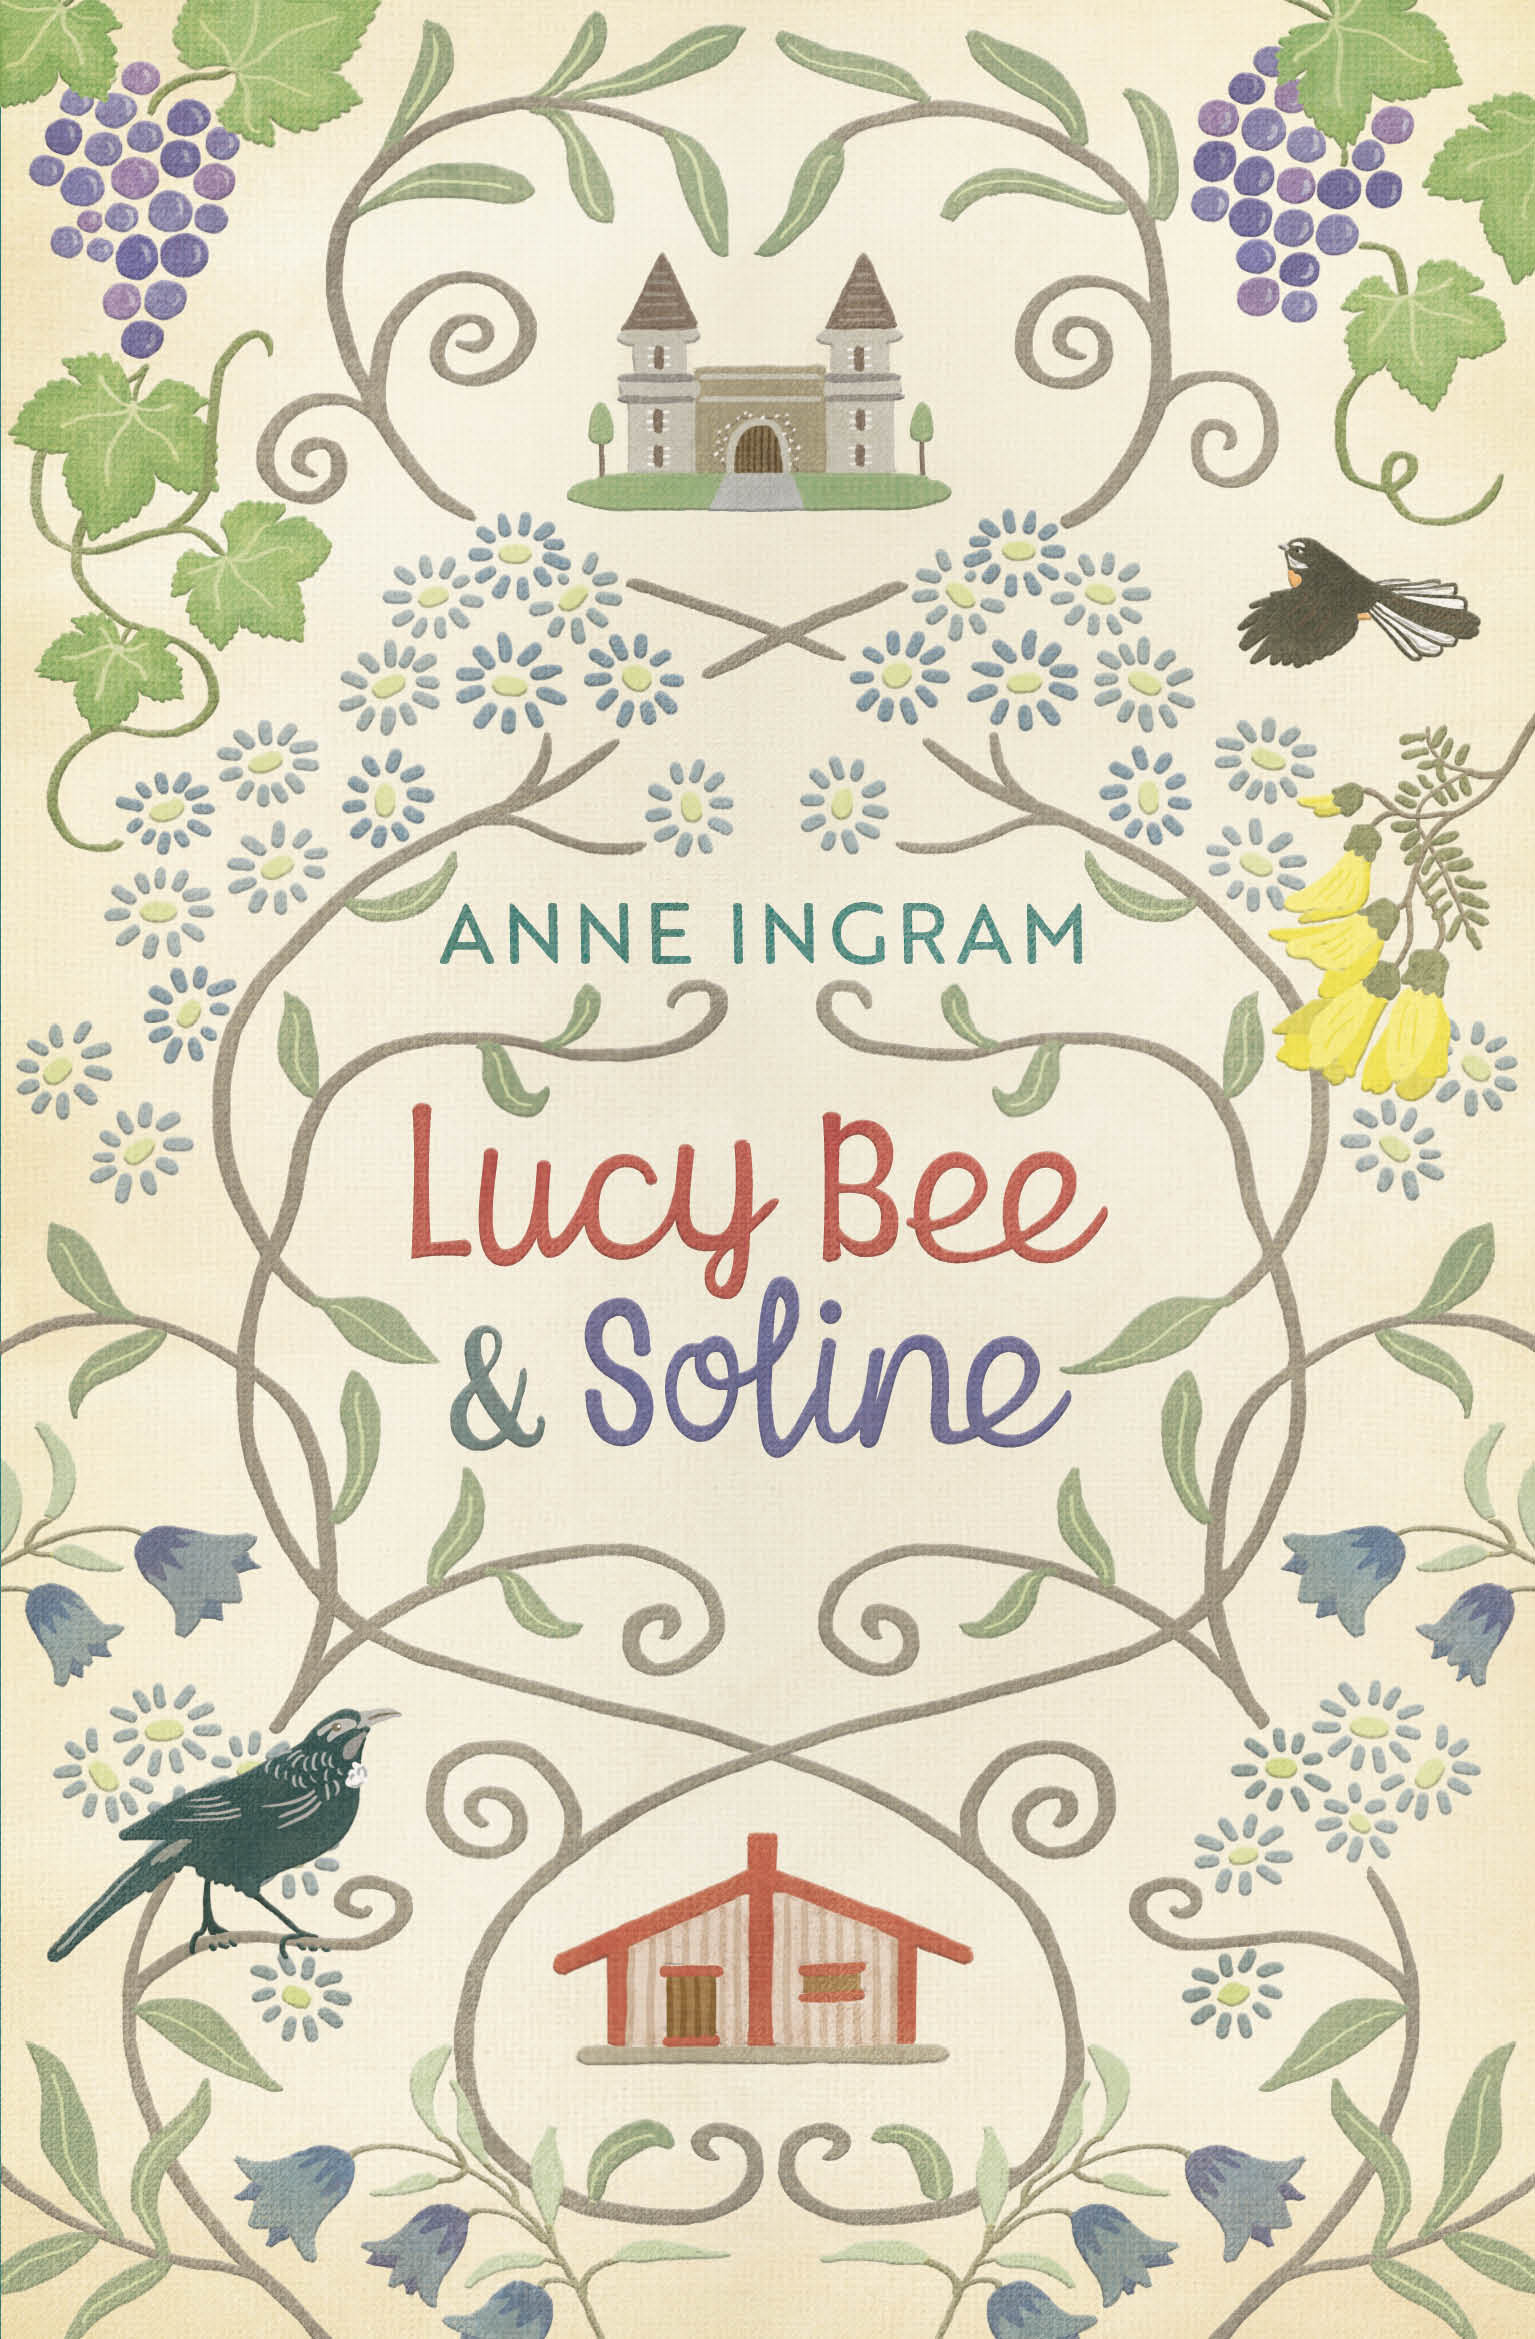 SLANZA recommends Lucy Bee & Soline as a supporting resource for the NZ history curriculum.